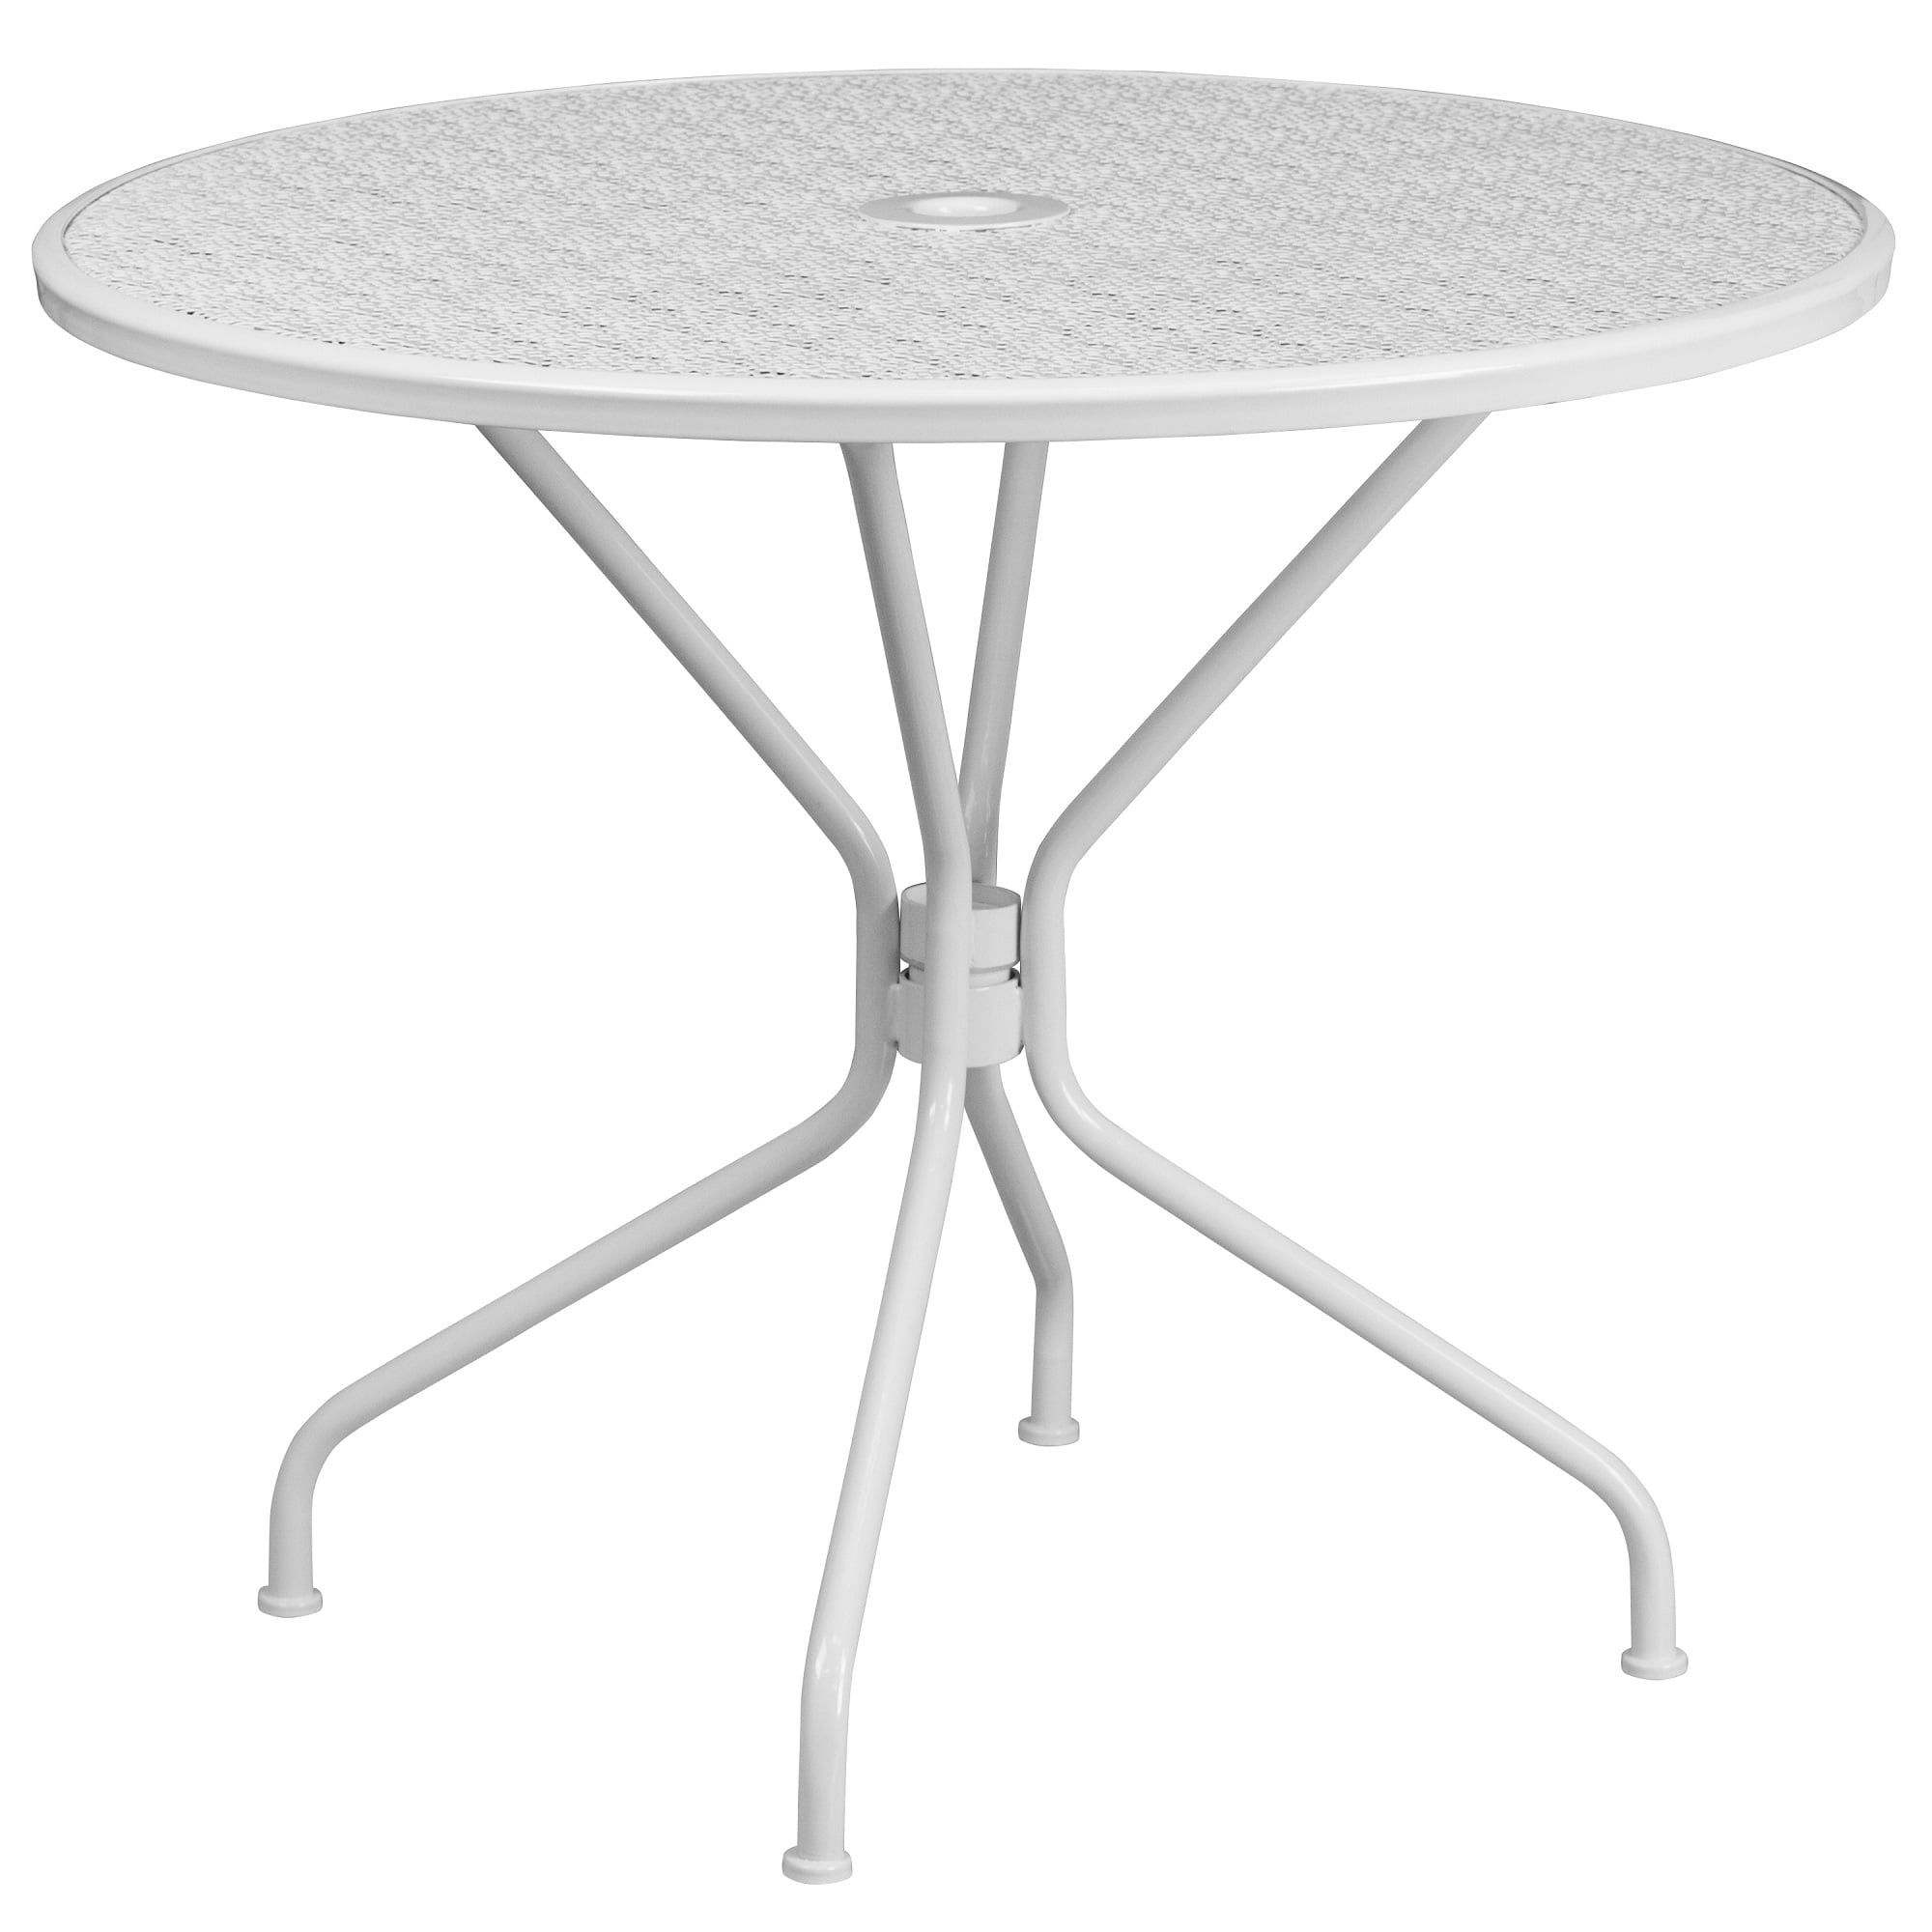 35 25 White Contemporary Round Outdoor, Round Patio Table Set With Umbrella Hole